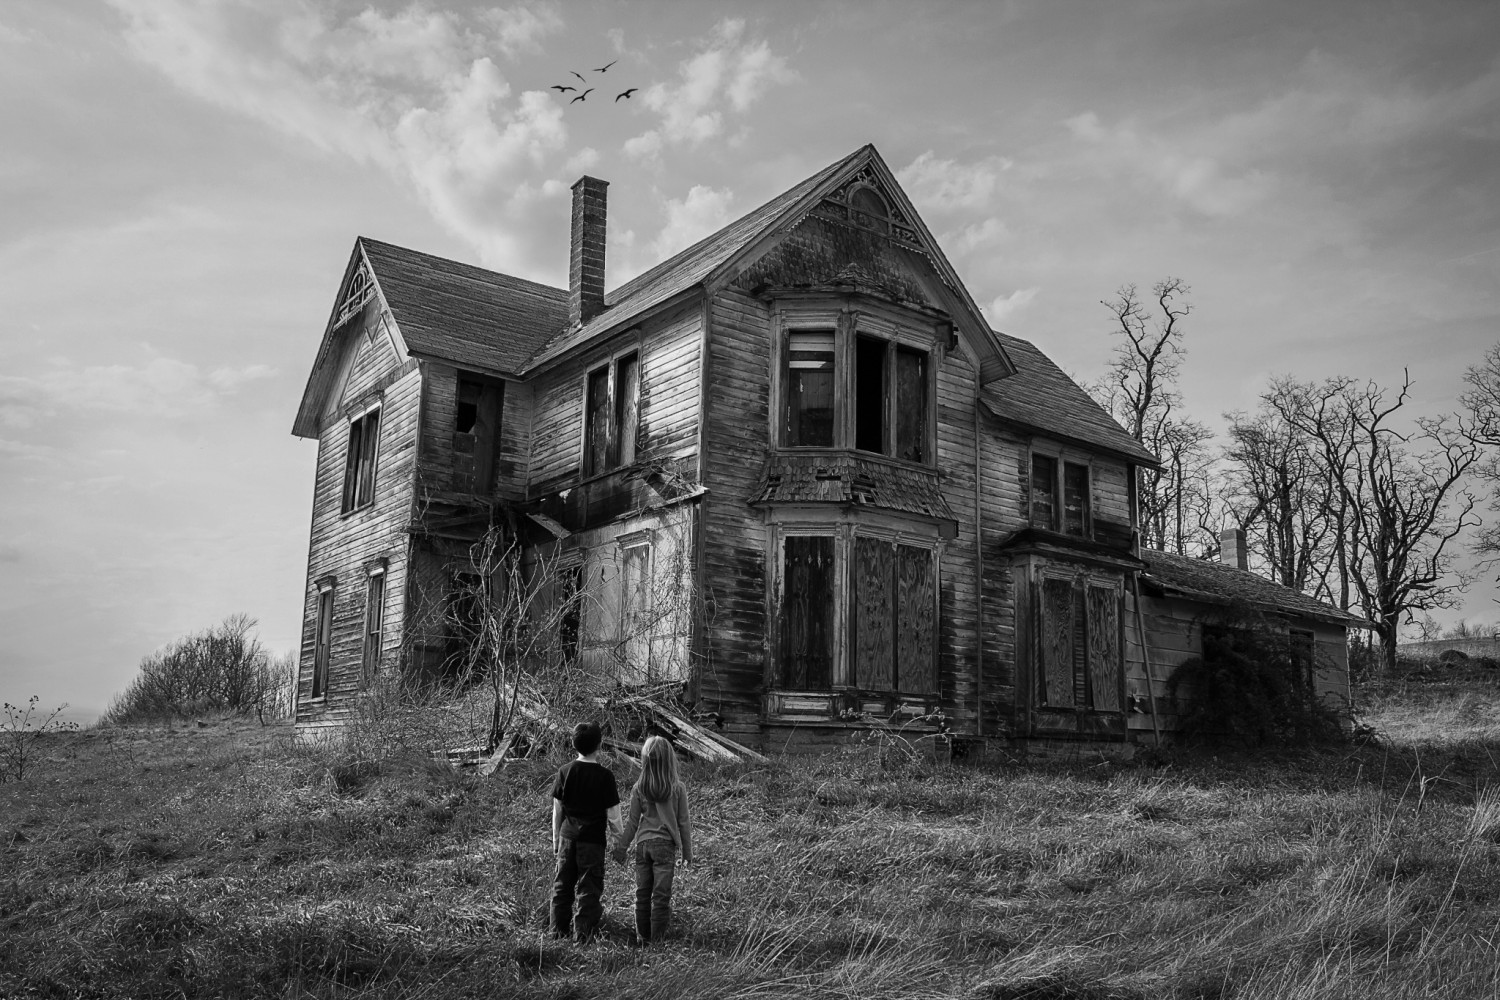 Create An Atmosphere Of Horror With This Haunted House Photo Tutorial